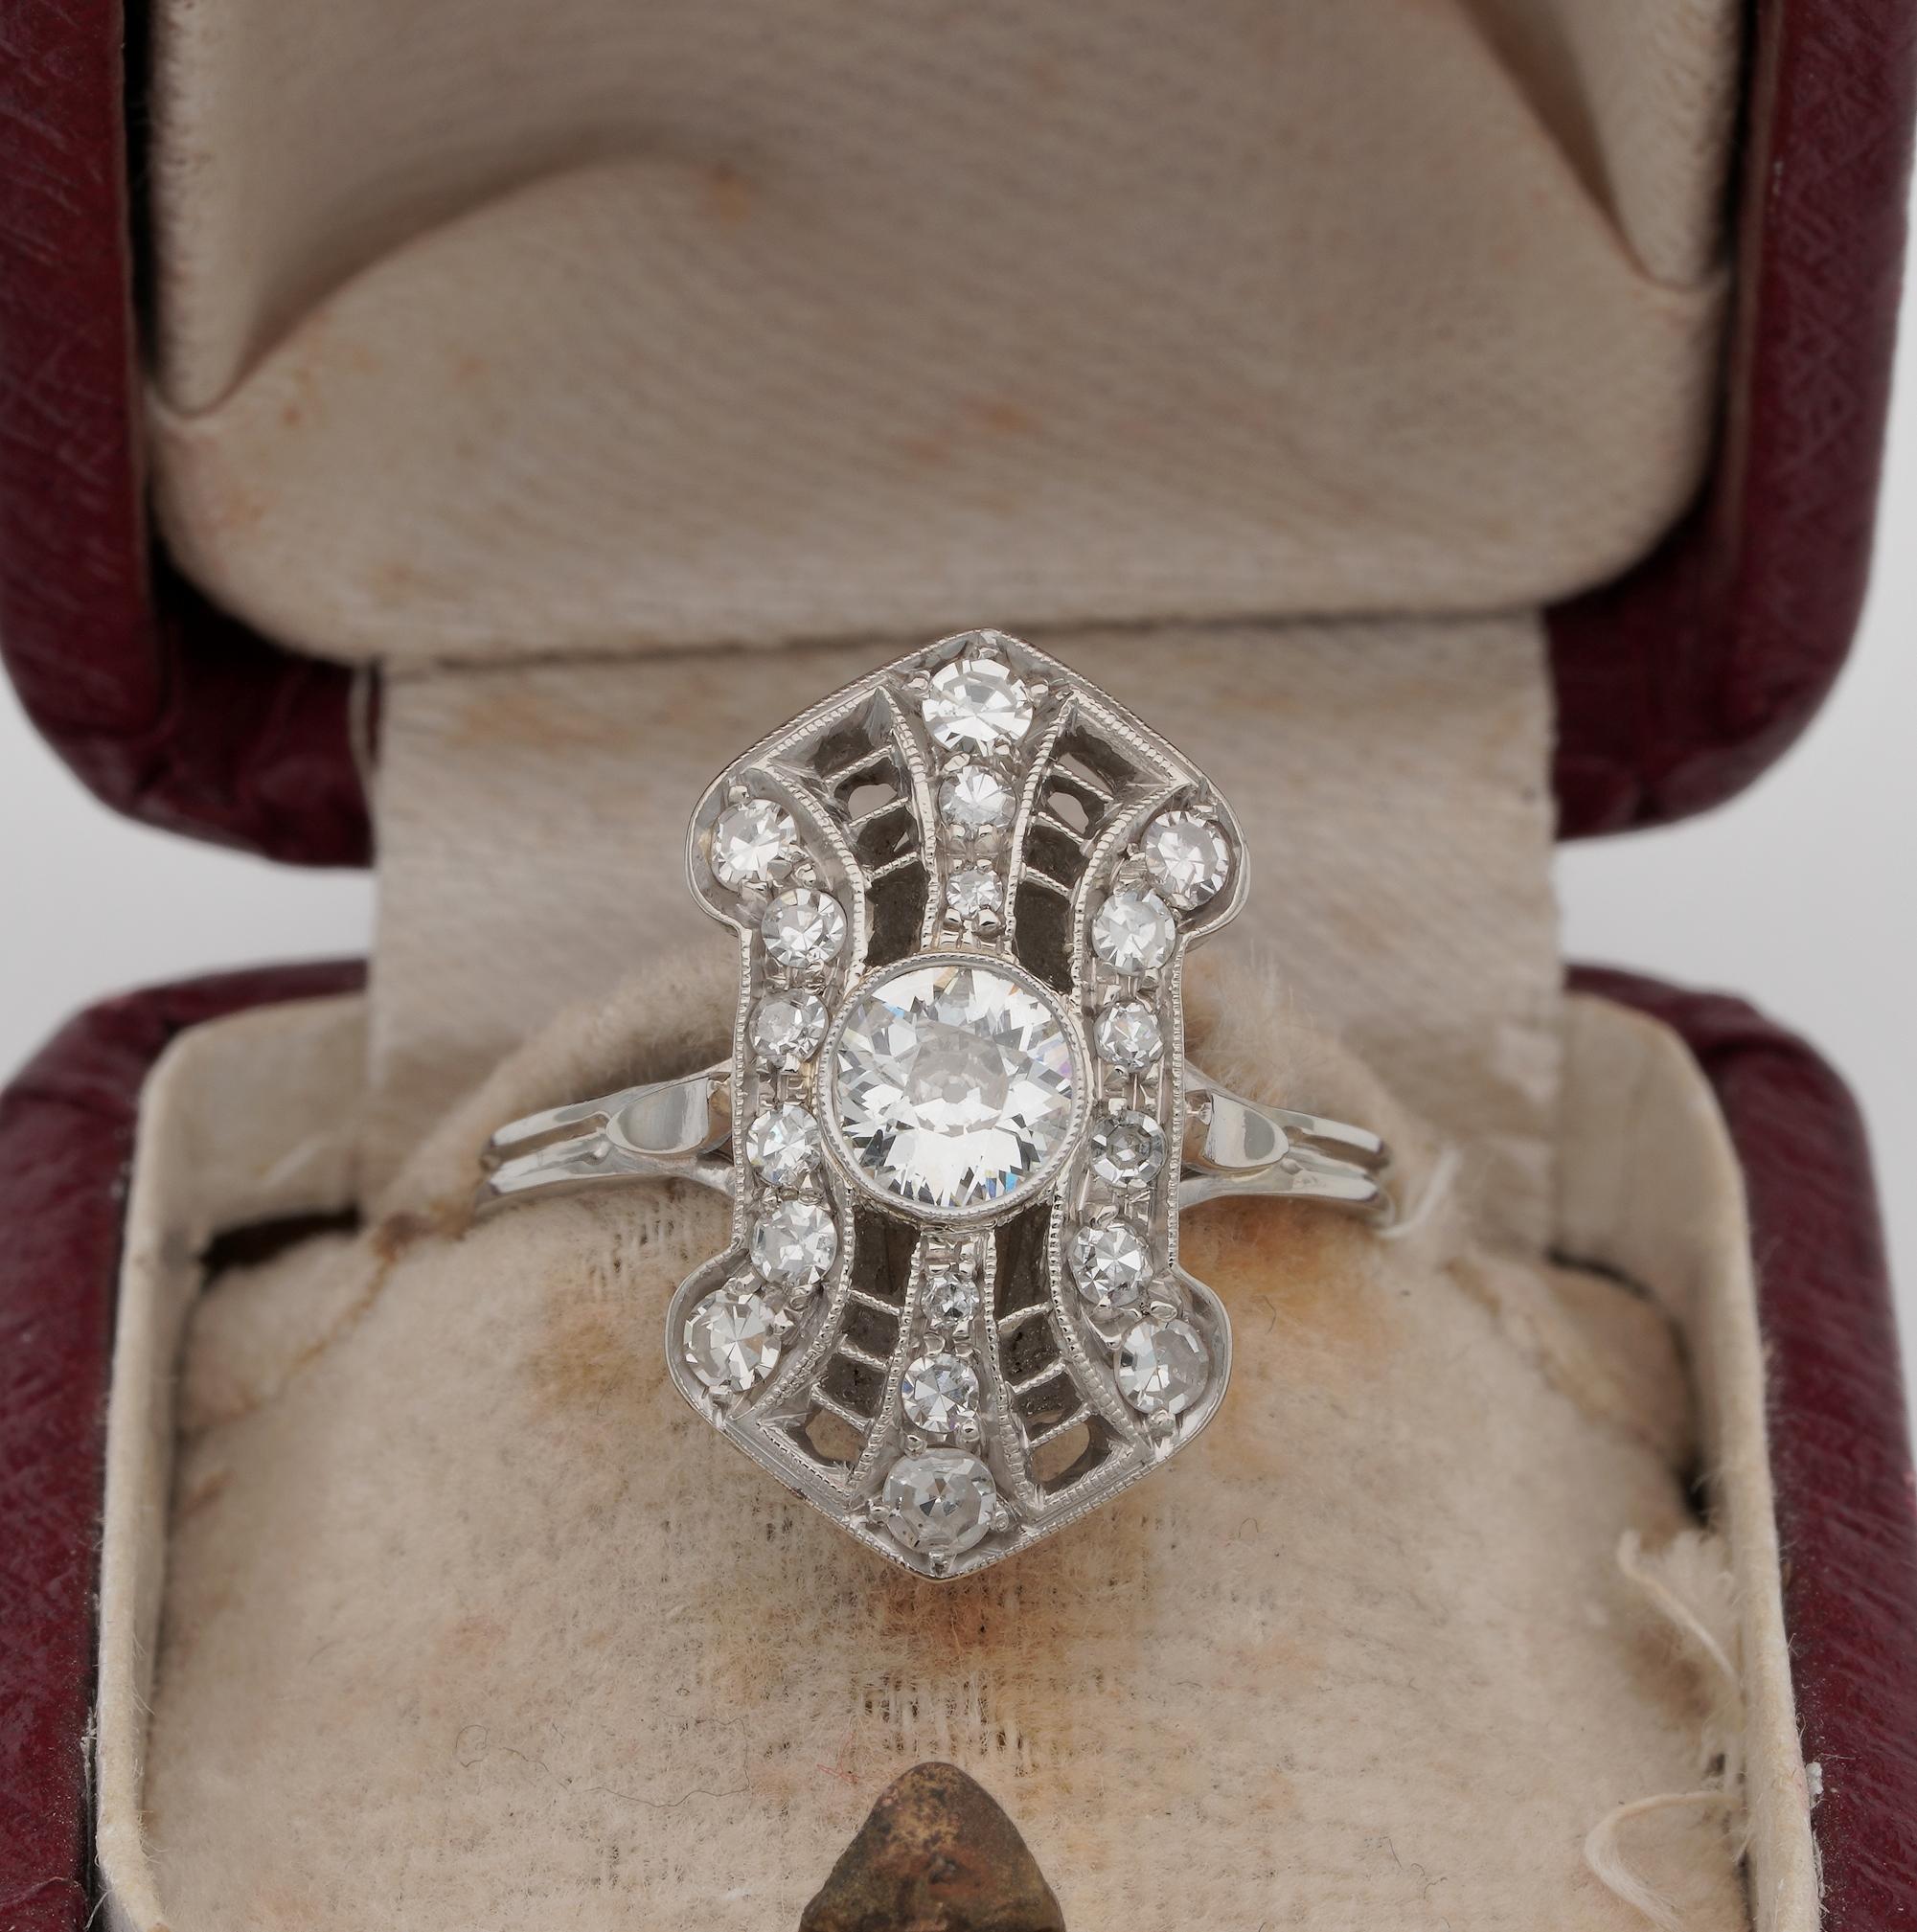 This charming Belle Epoque ring is 1910 ca.
18 KT solid gold Platinum top
Elegant and precious openwork expressed at top level of workmanship typical of that era
Centre Diamond is a collect set old European cut of .40 Ct H VVS with further .50 Ct of